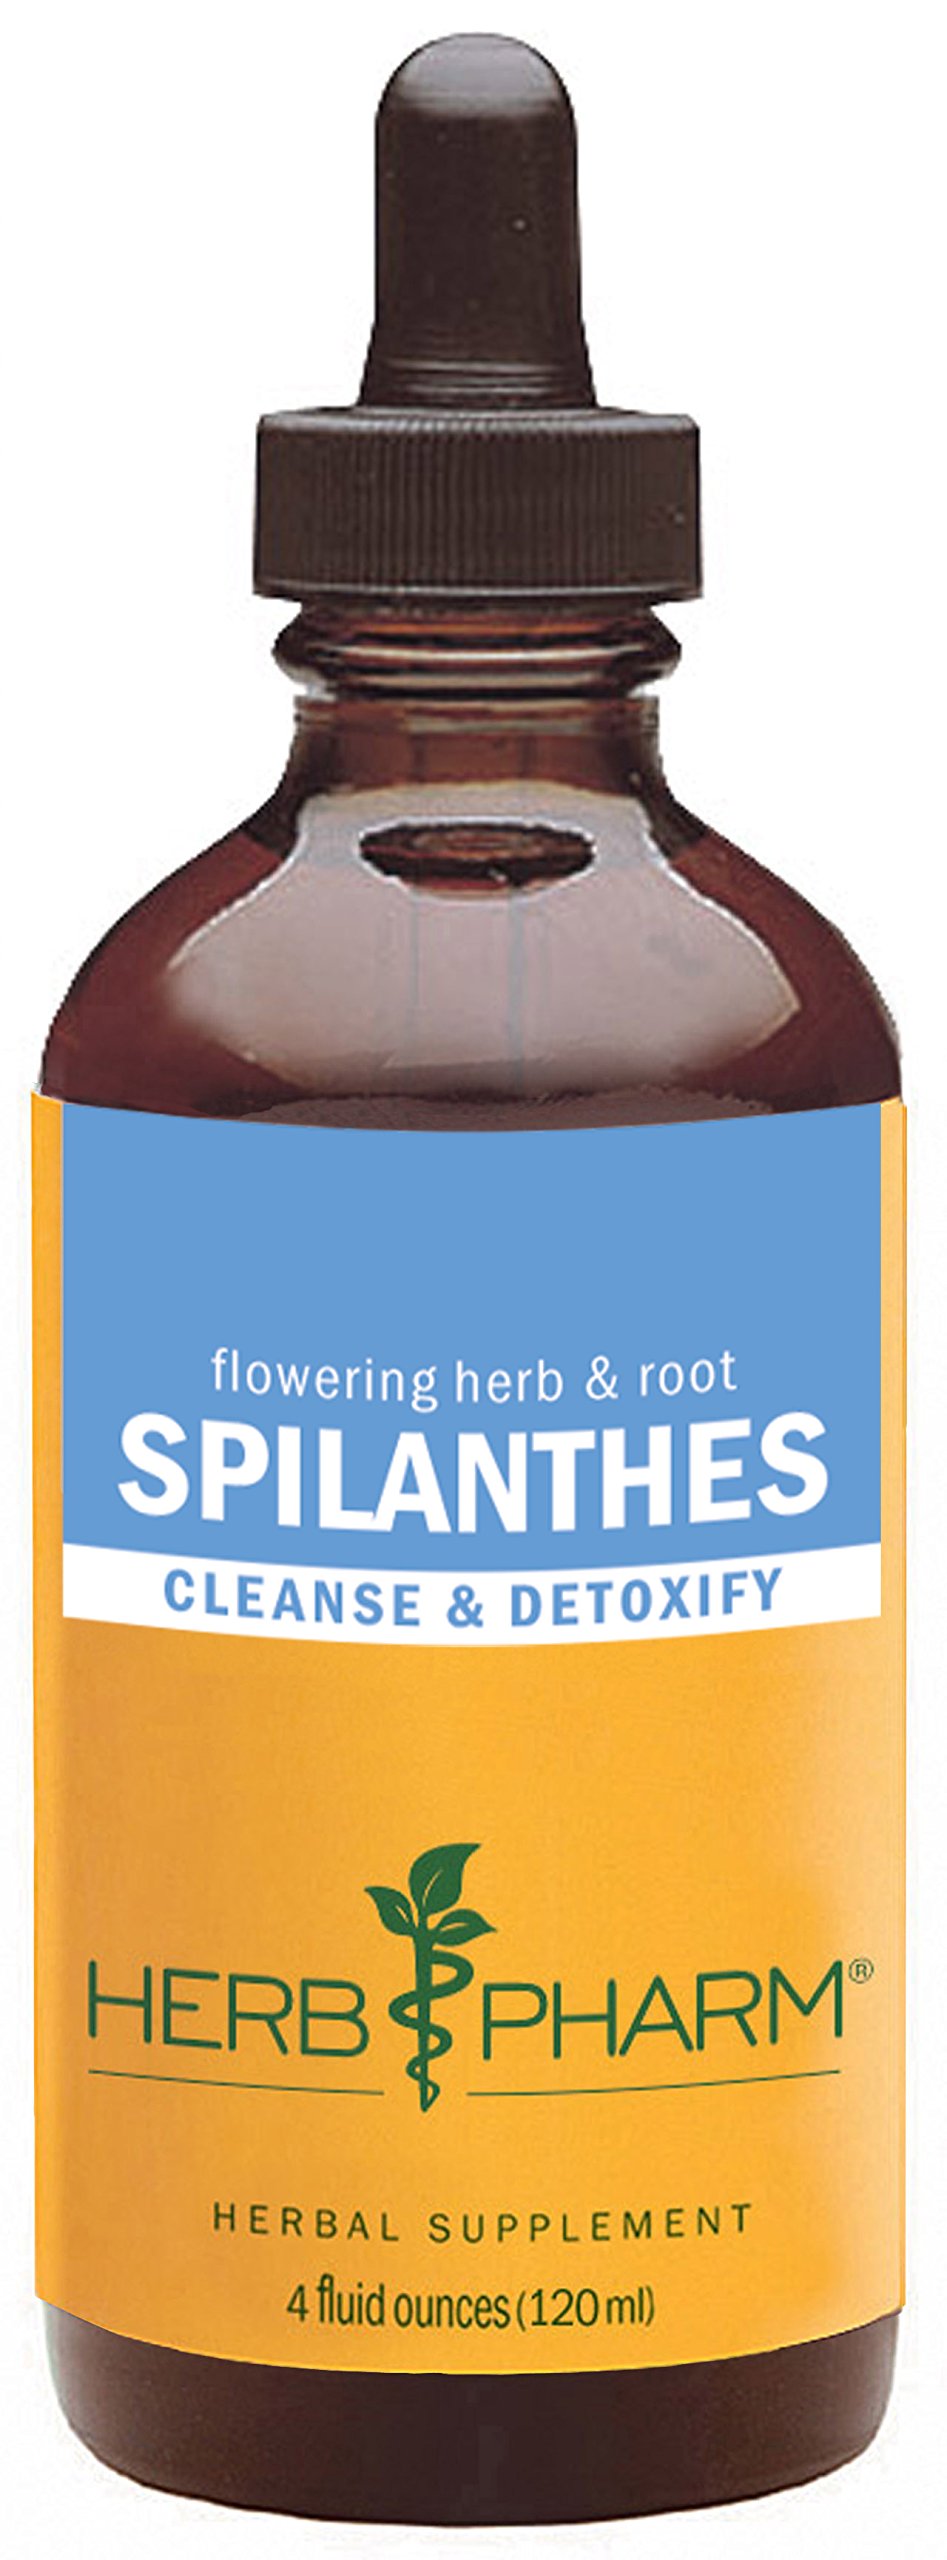 Herb Pharm Certified Organic Spilanthes Liquid Extract for Cleansing and Detoxification - 4 Ounce